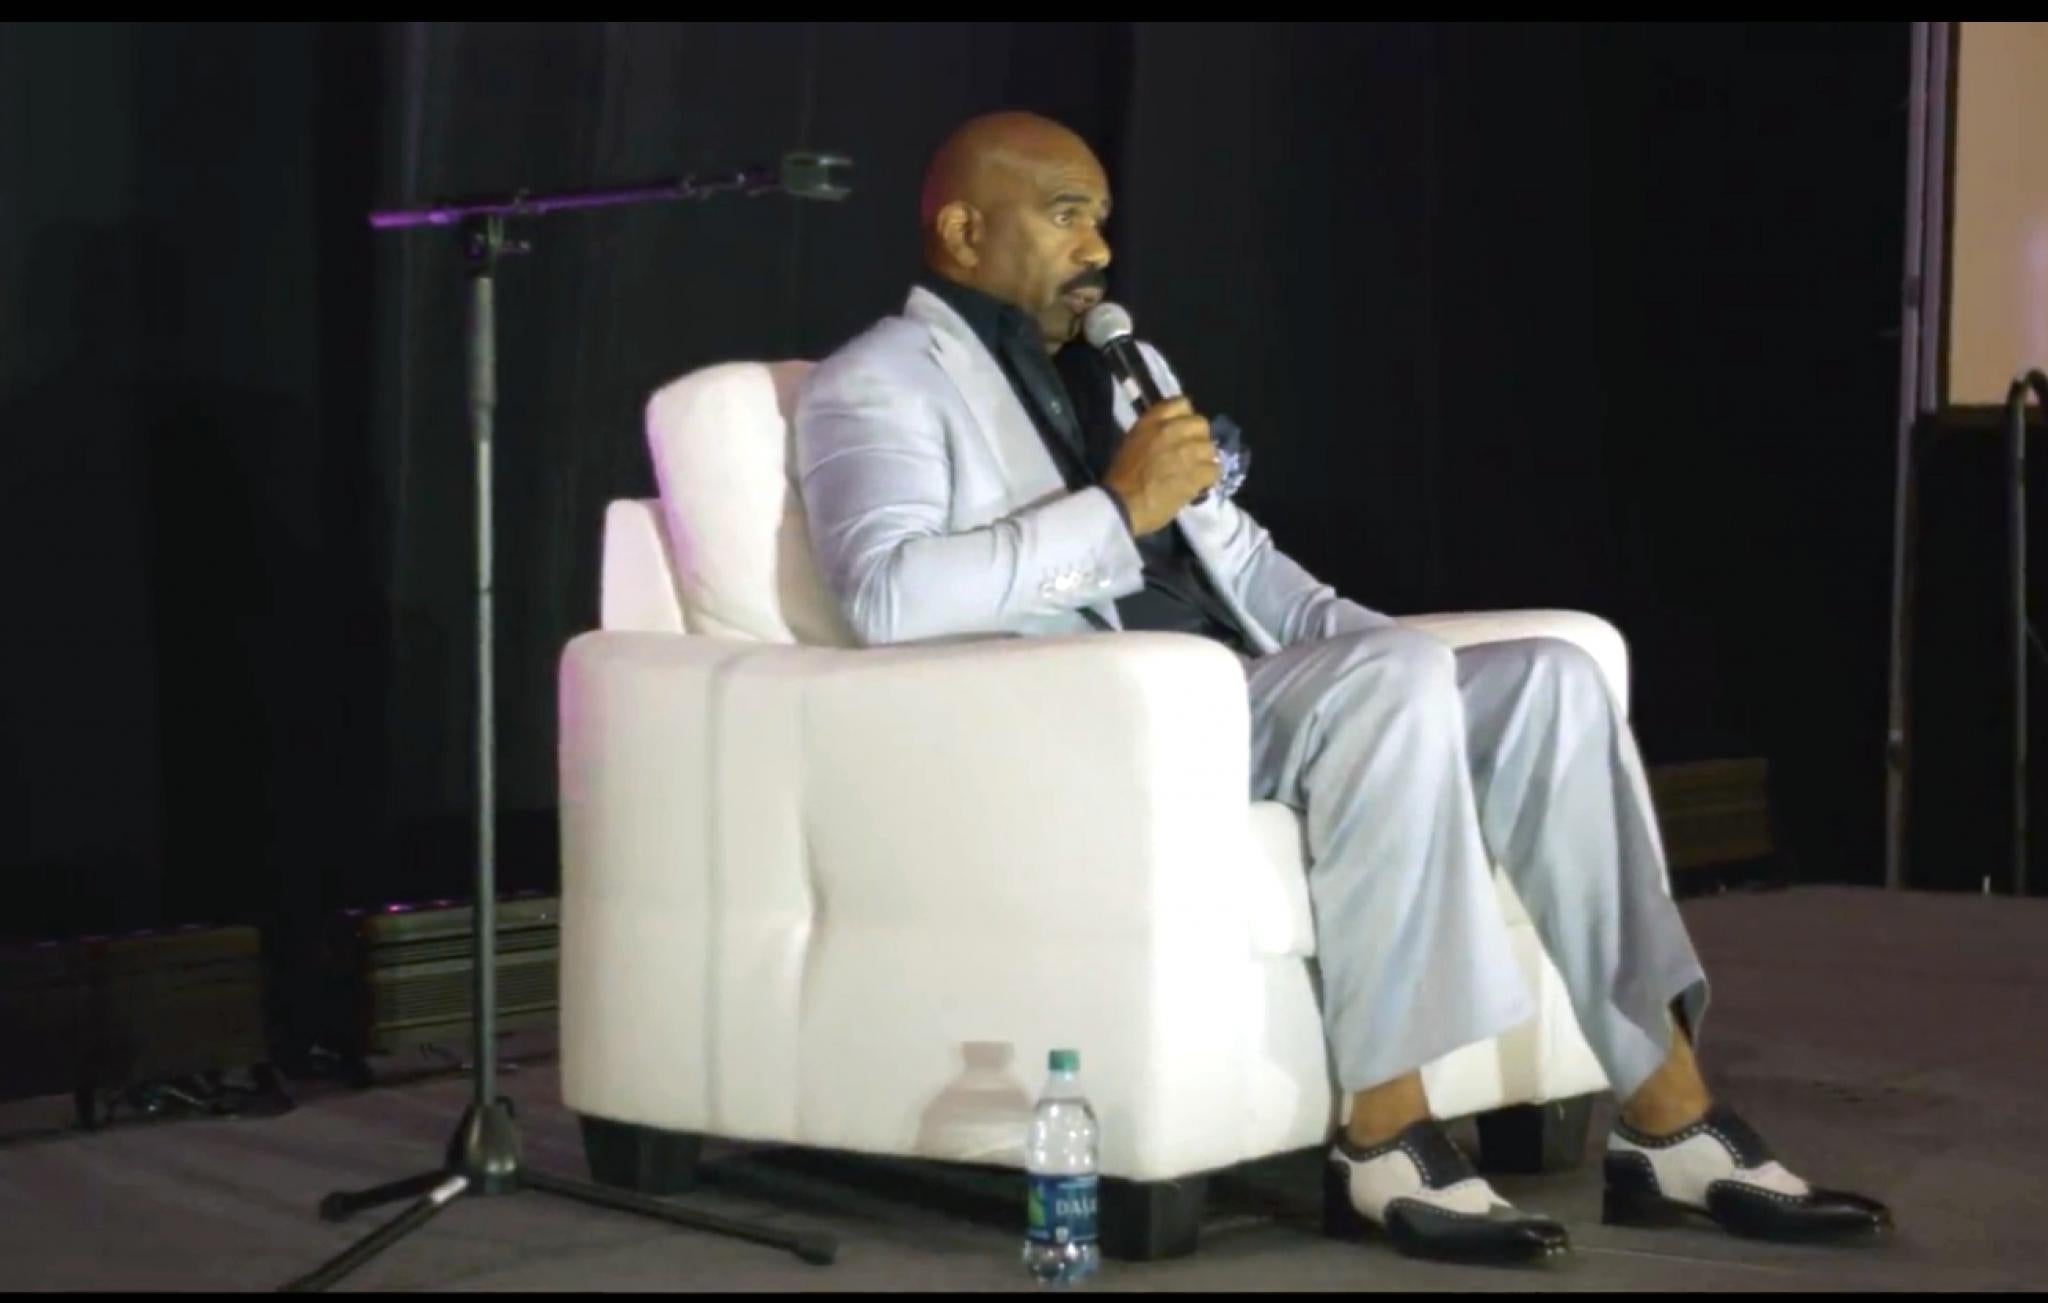 VIDEO: Inspiration at the ESSENCE Fest Empower U Stage